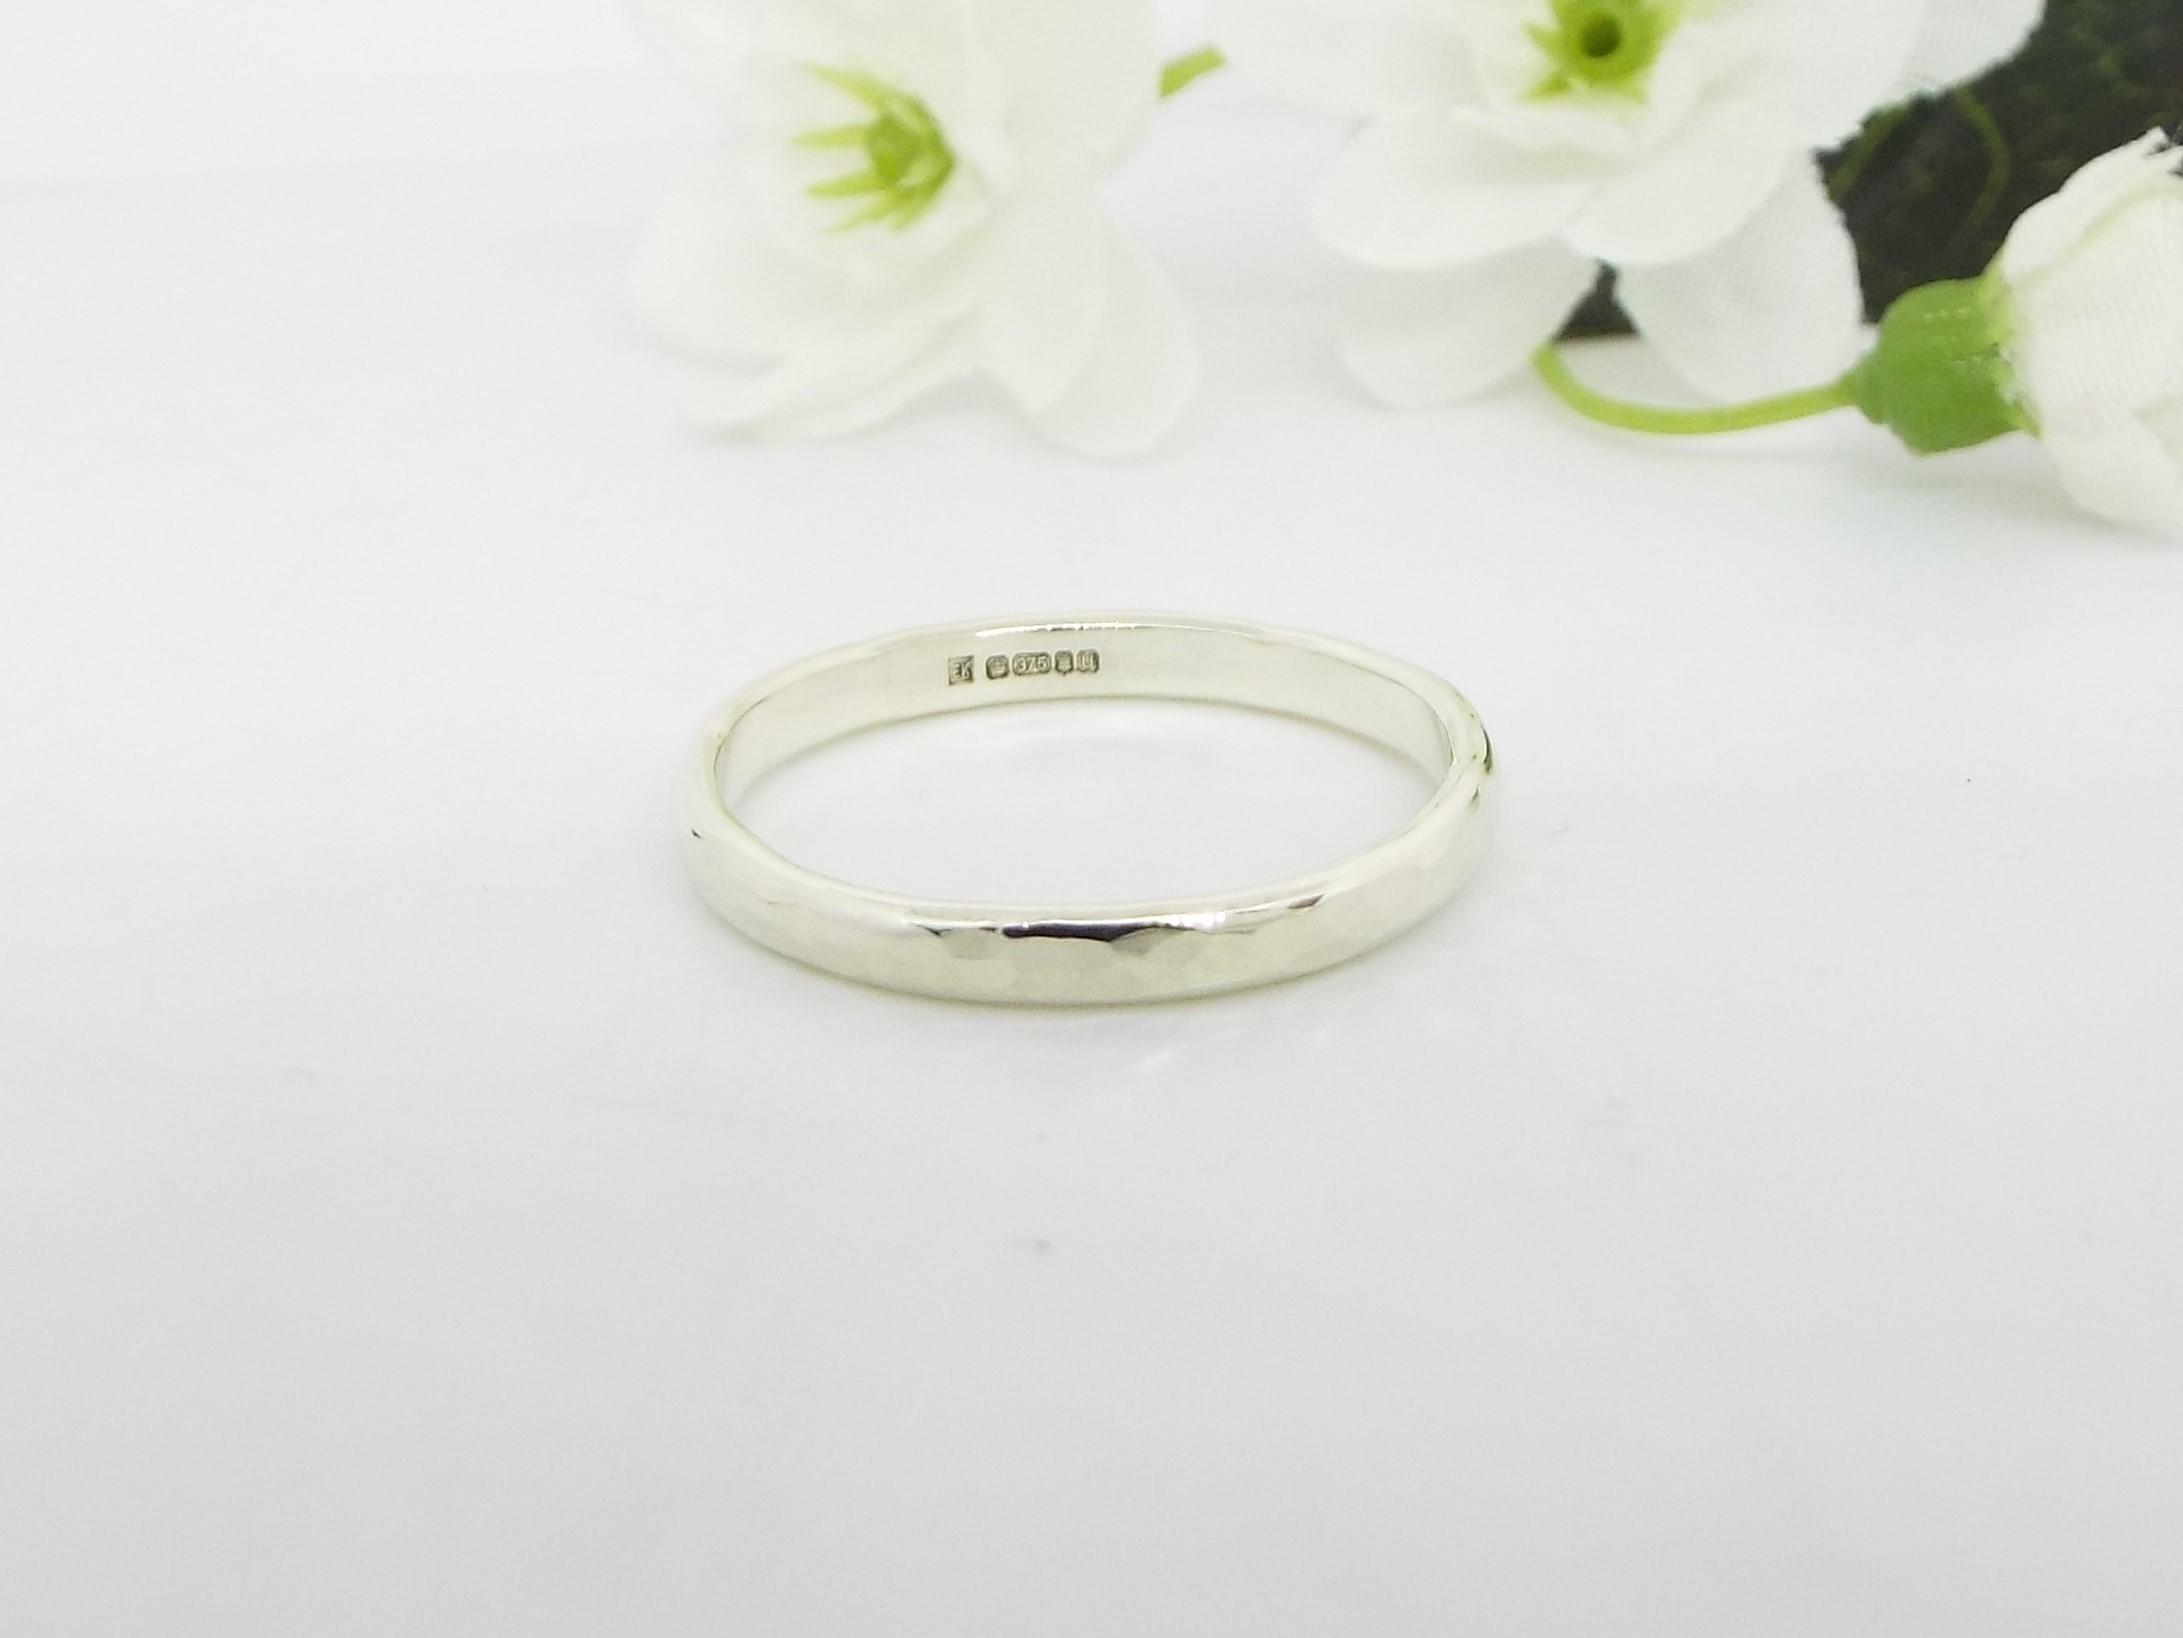 9ct white gold wedding ring for her